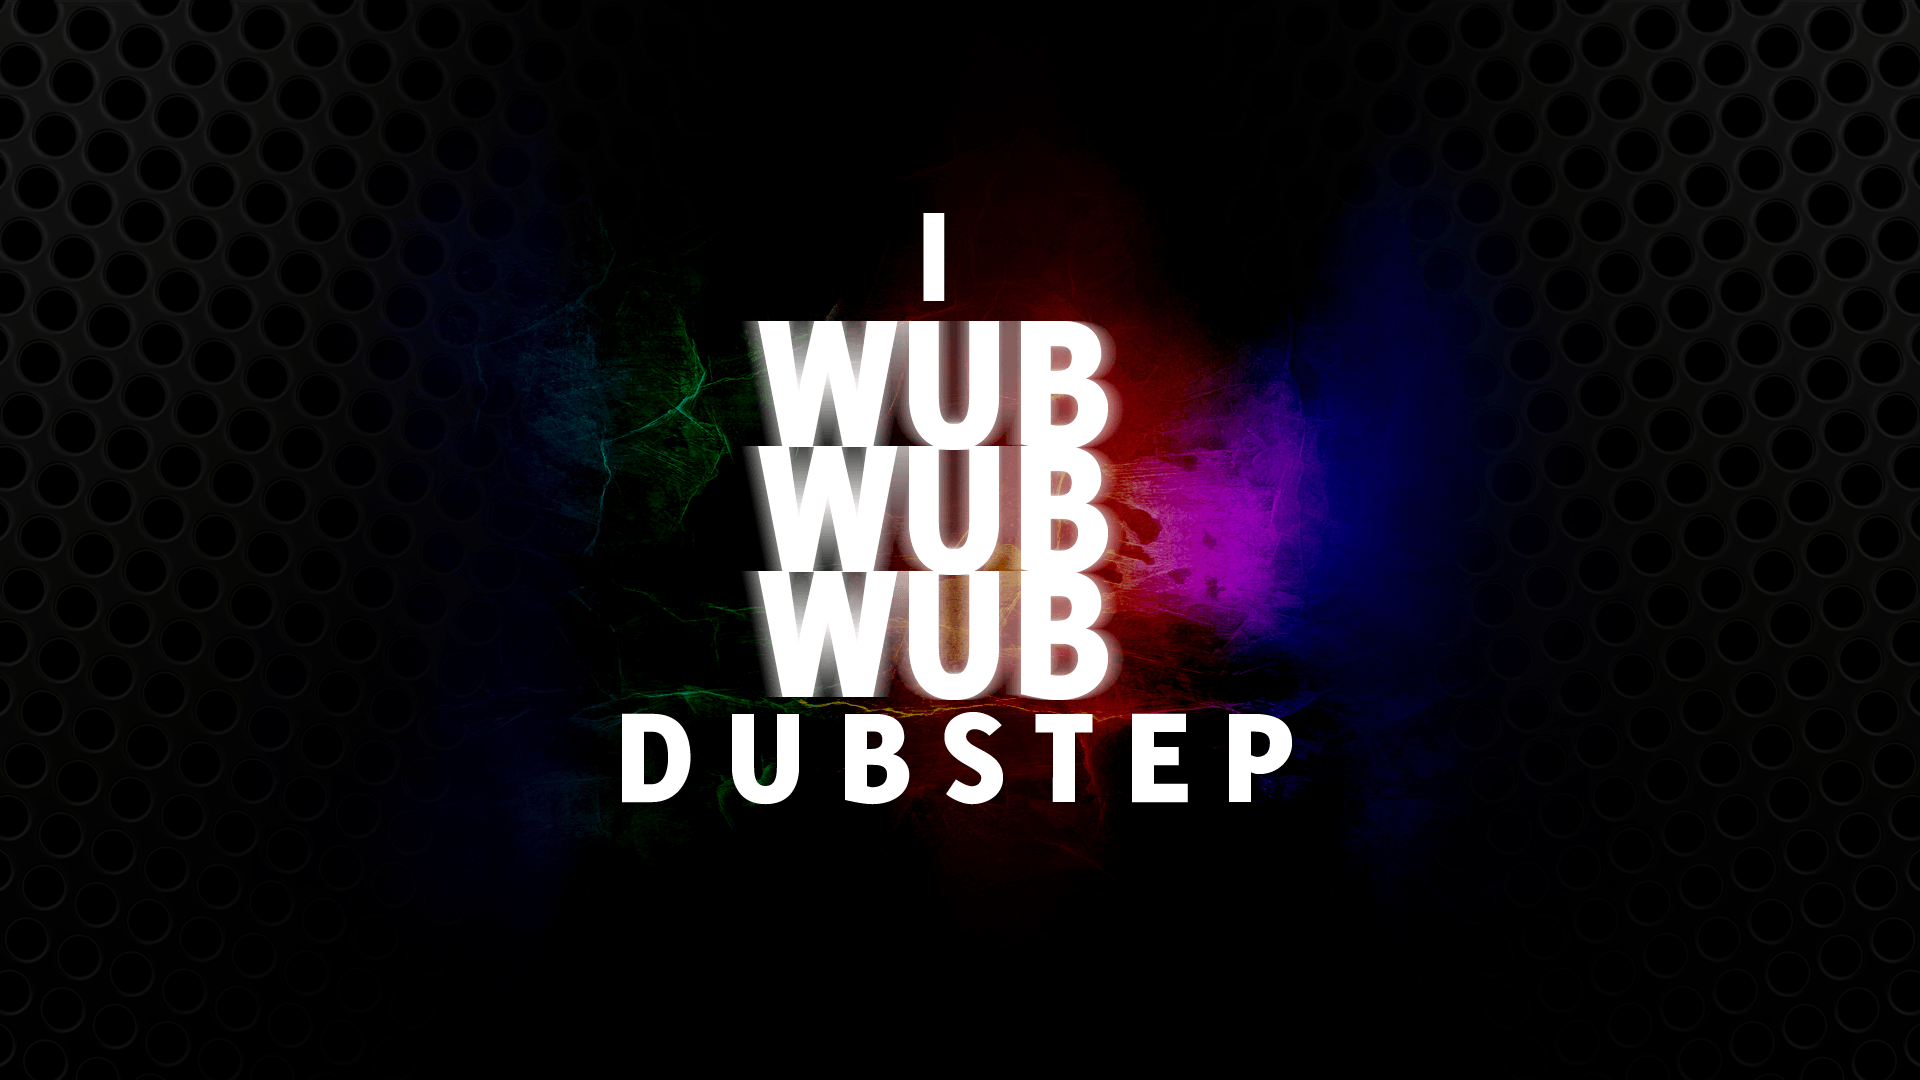 Dubstep Full HD Wallpaper and Background Imagex1080